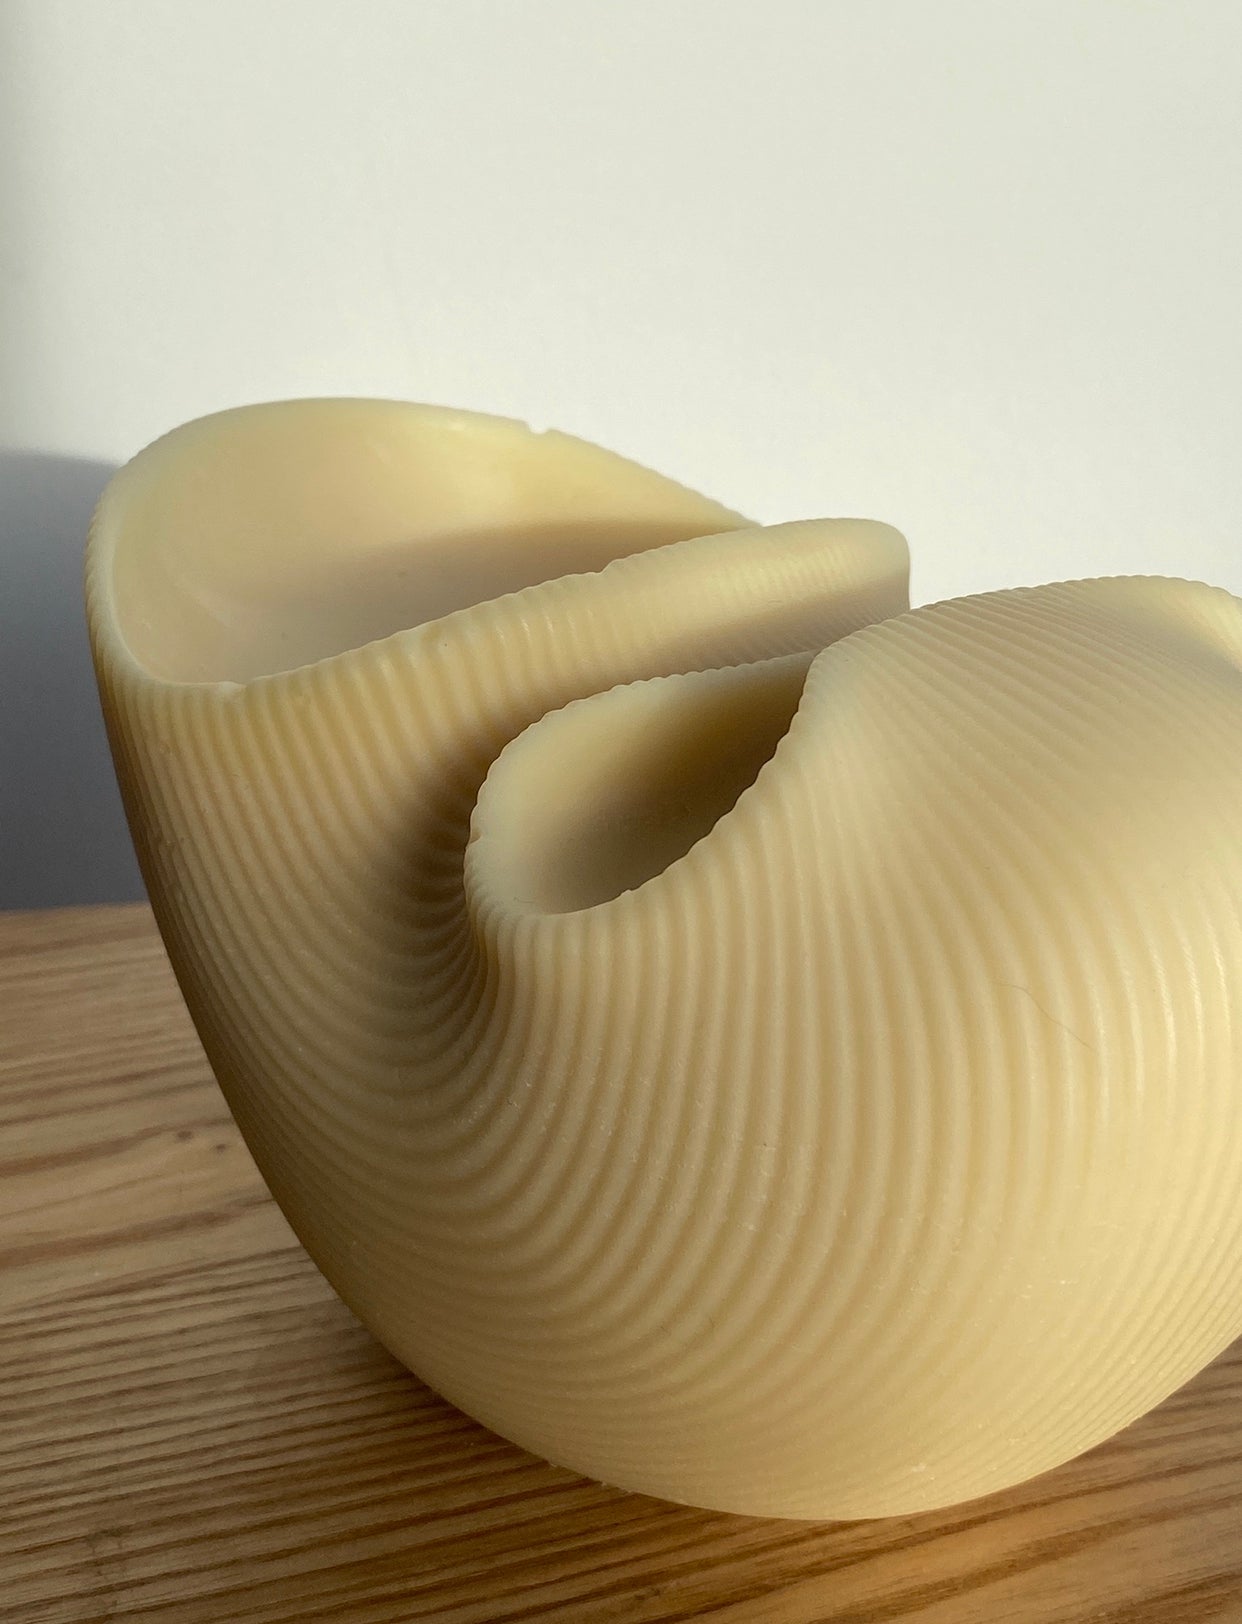 'Nudey Beach' Sculptural Candle